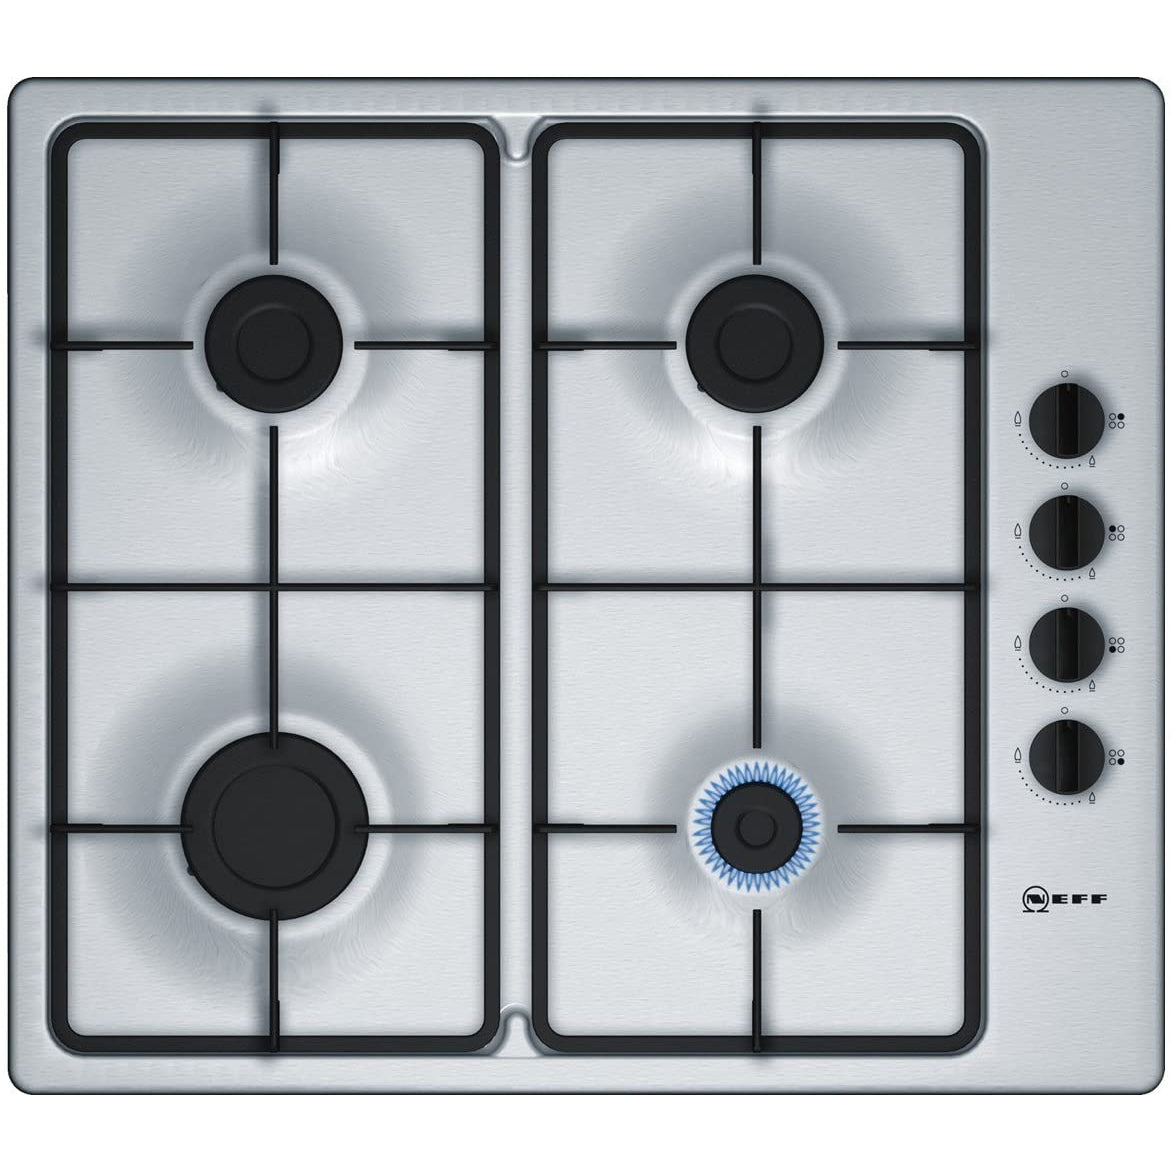 Neff T26BR46N0 Built-in Gas Hob - Stainless Steel